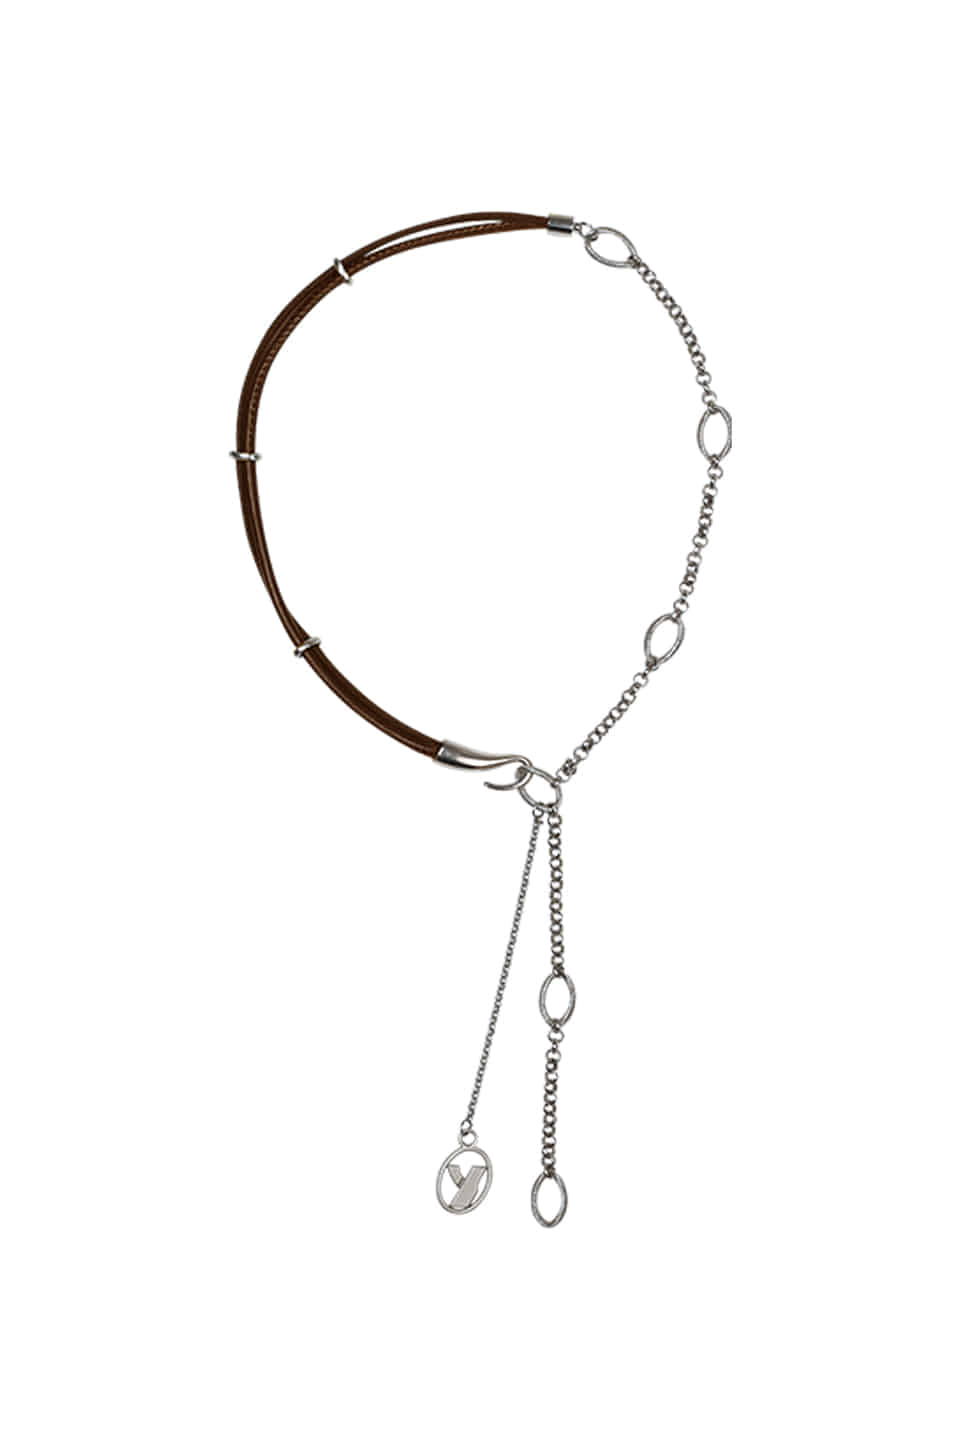 HOOK LEATHER CHAIN NECKLACE - BROWN